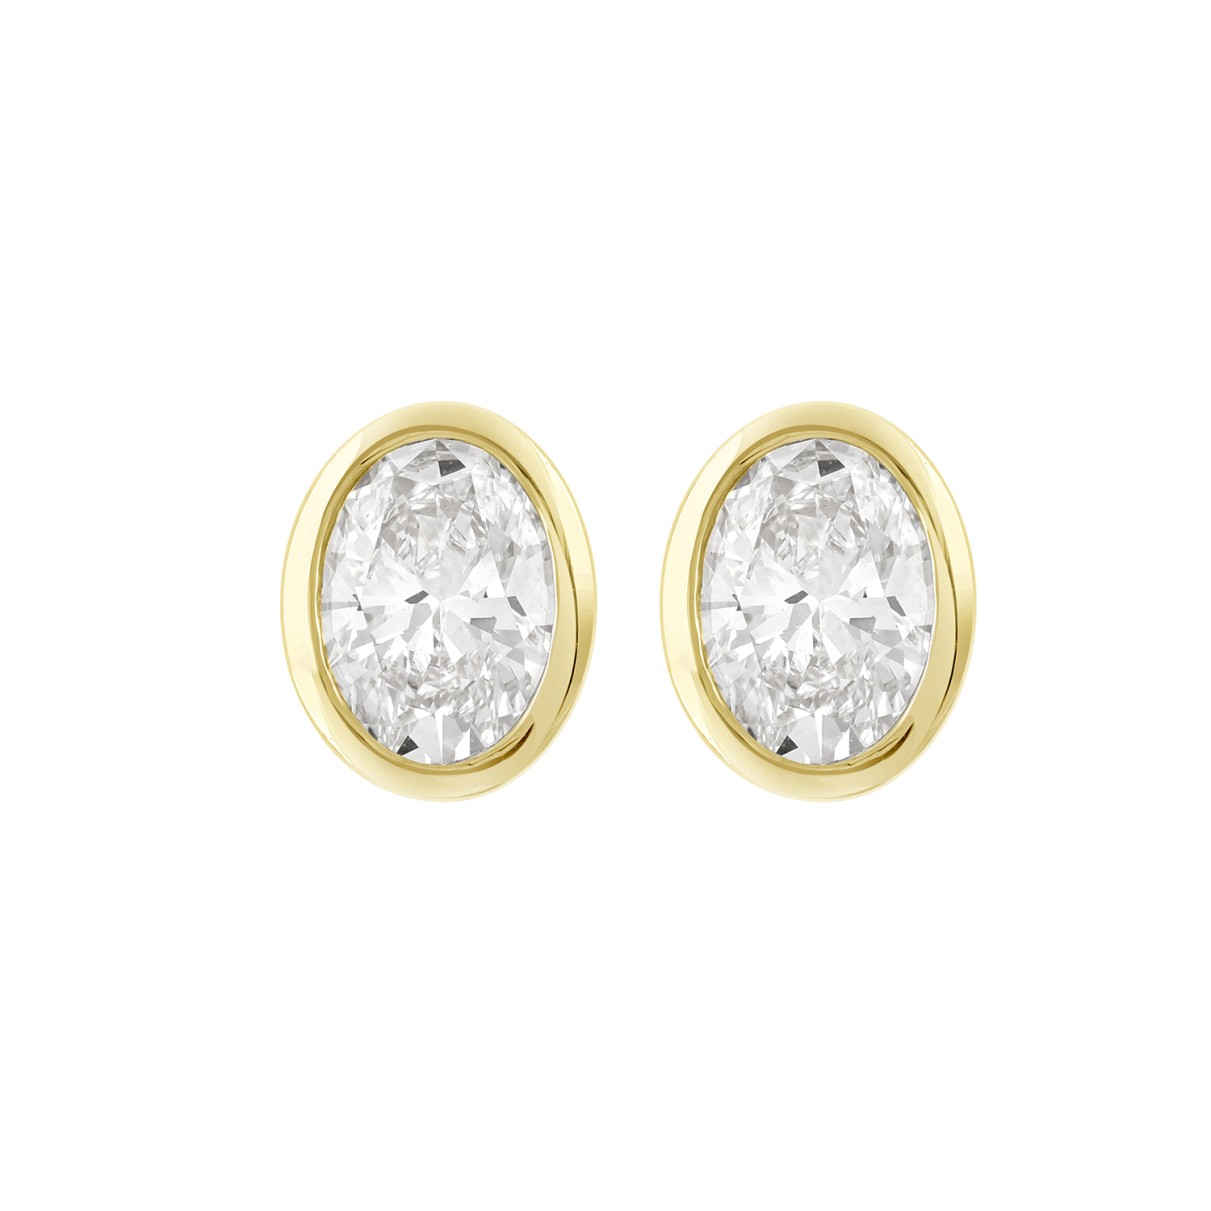 LADIES SOLITAIRE EARRING 2CT OVAL DIAMOND 14K YELL...